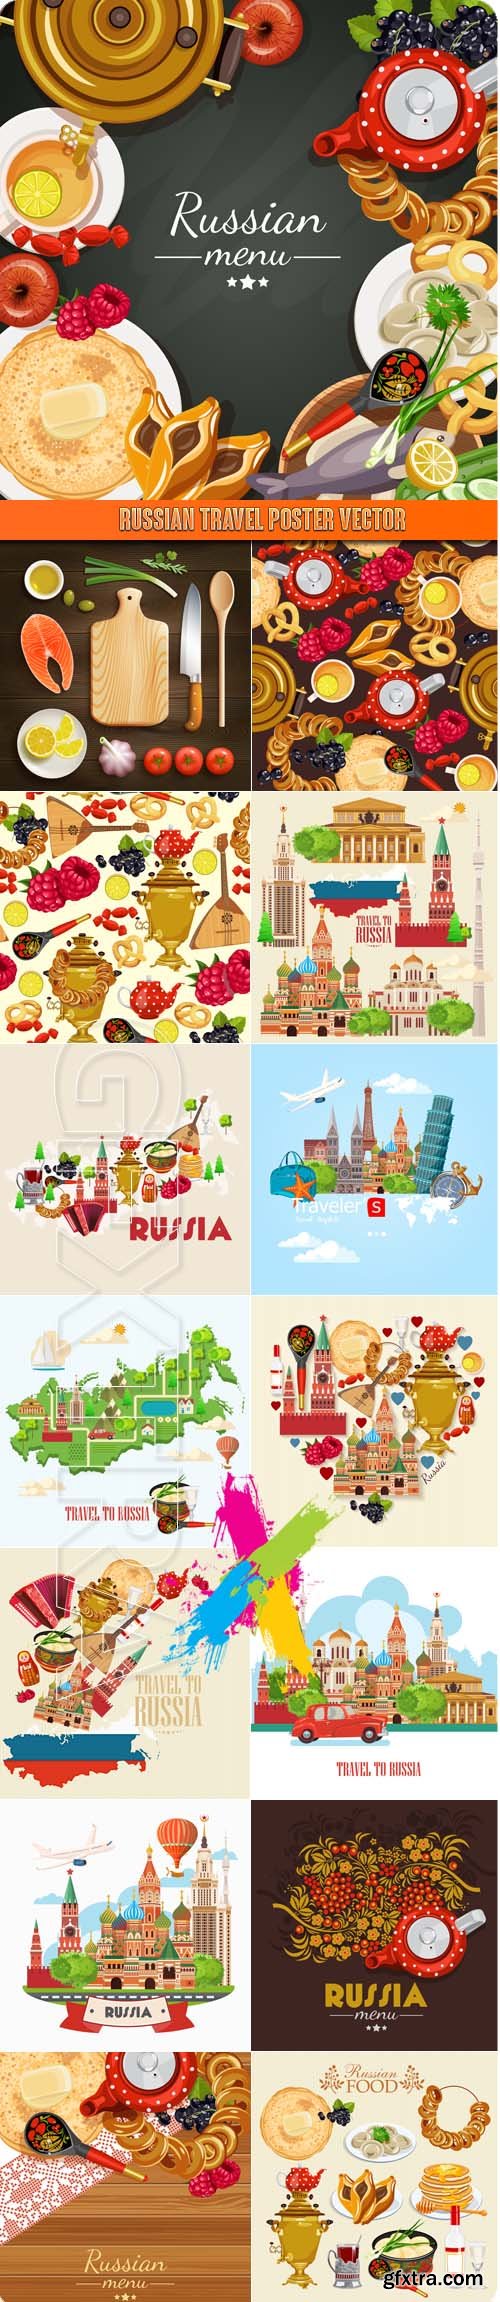 Russian travel poster vector